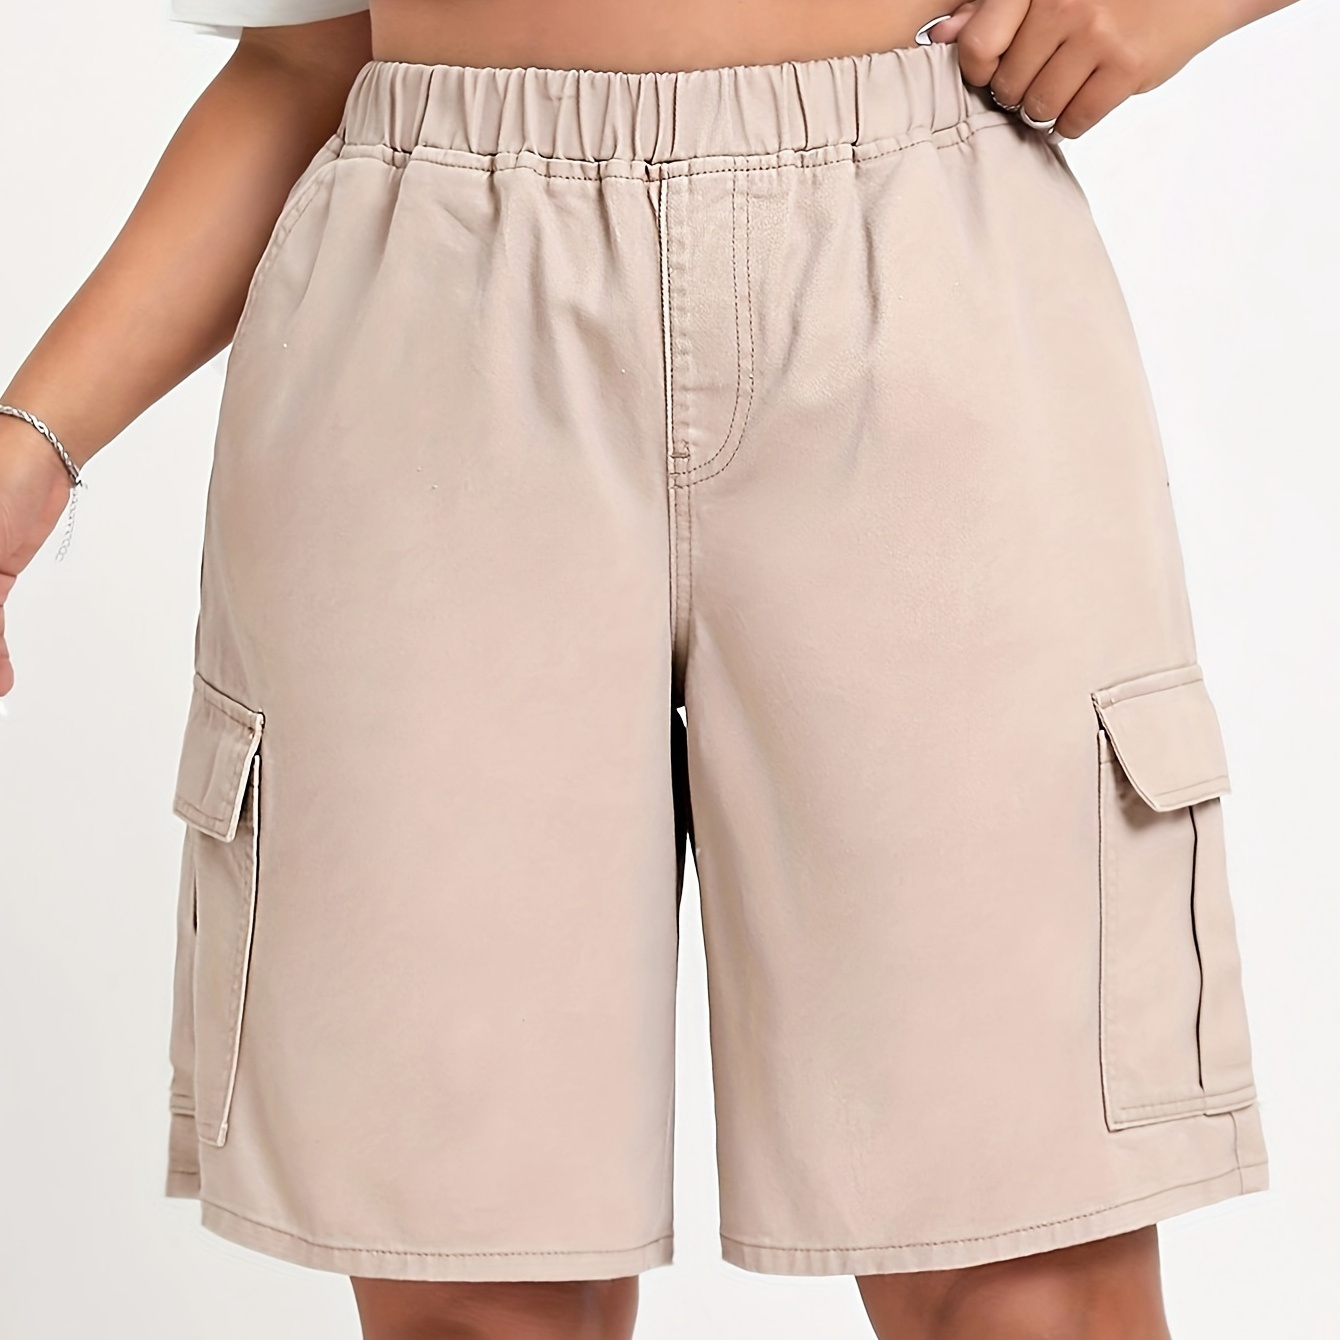 

Women's Plus Size Casual Streetwear Elastic Waist Cargo Demim Shorts, Loose Fit With Multiple Pockets Jorts, Fashionable Summer Clothing